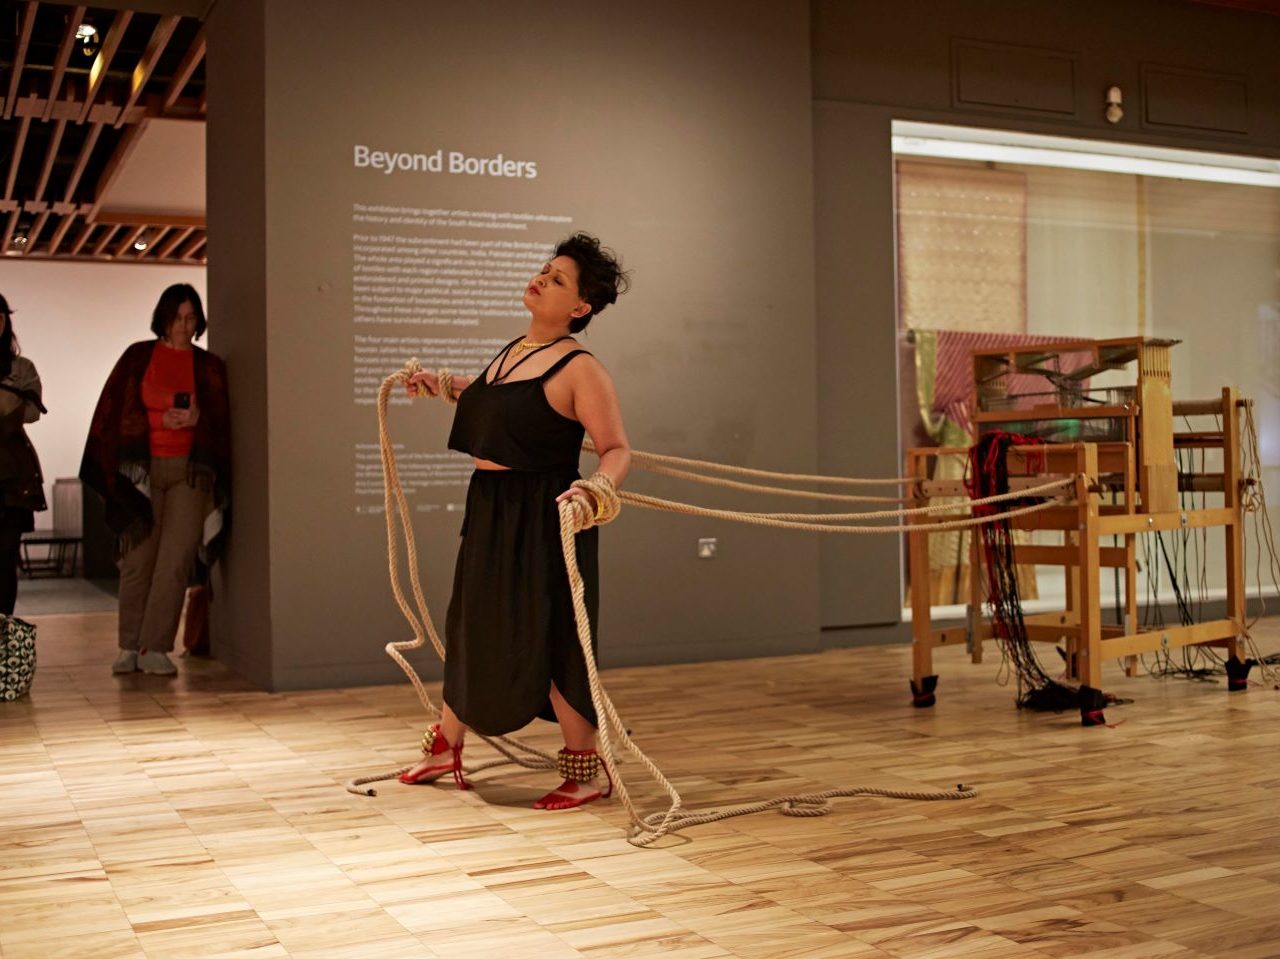 The artist performing in a gallery space, they are attached to a loom through ropes. They are wearing a long black skirt and a black top, their feet are painted red and they have bells around their ankles.